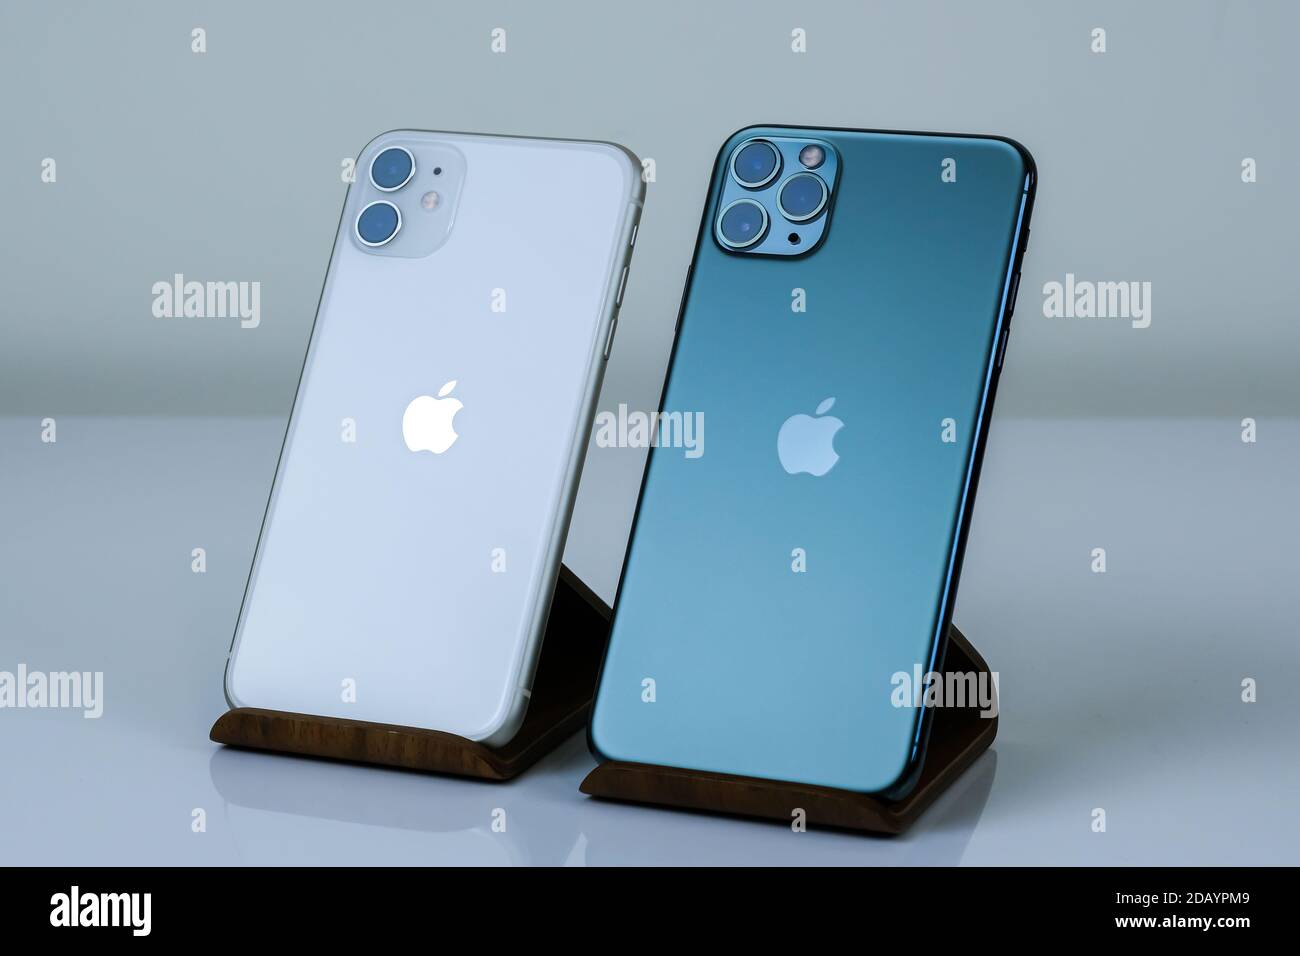 Iphone 11 Pro Max In Midnight Green Next To Iphone 11 In White Stock Photo Alamy